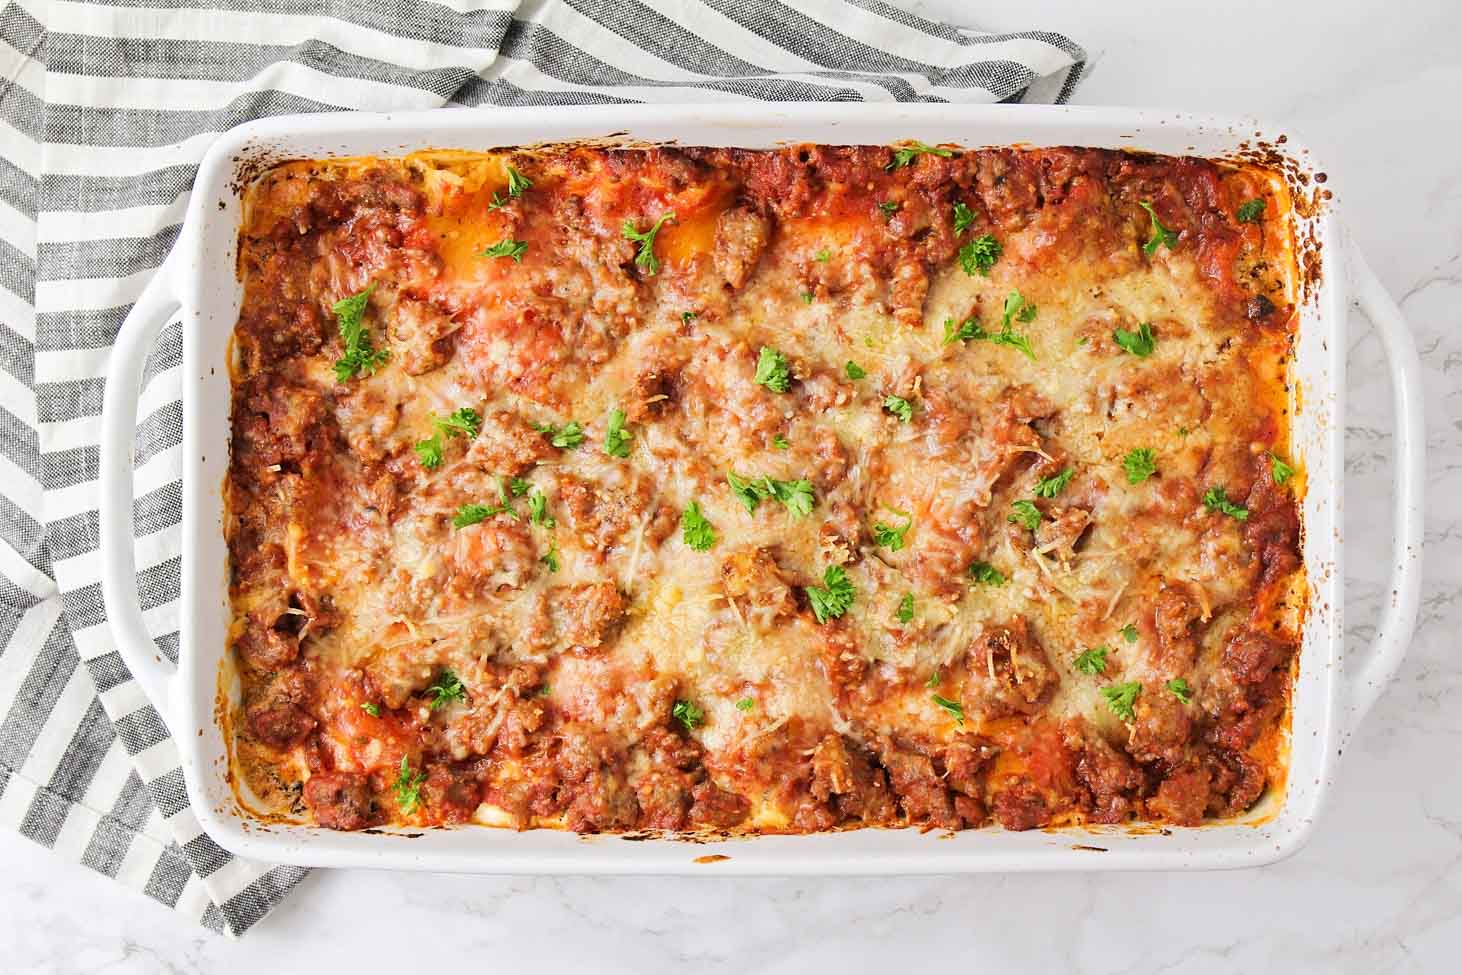 Easy Dinner Ideas - Easy lasagna in a white casserole baking dish.